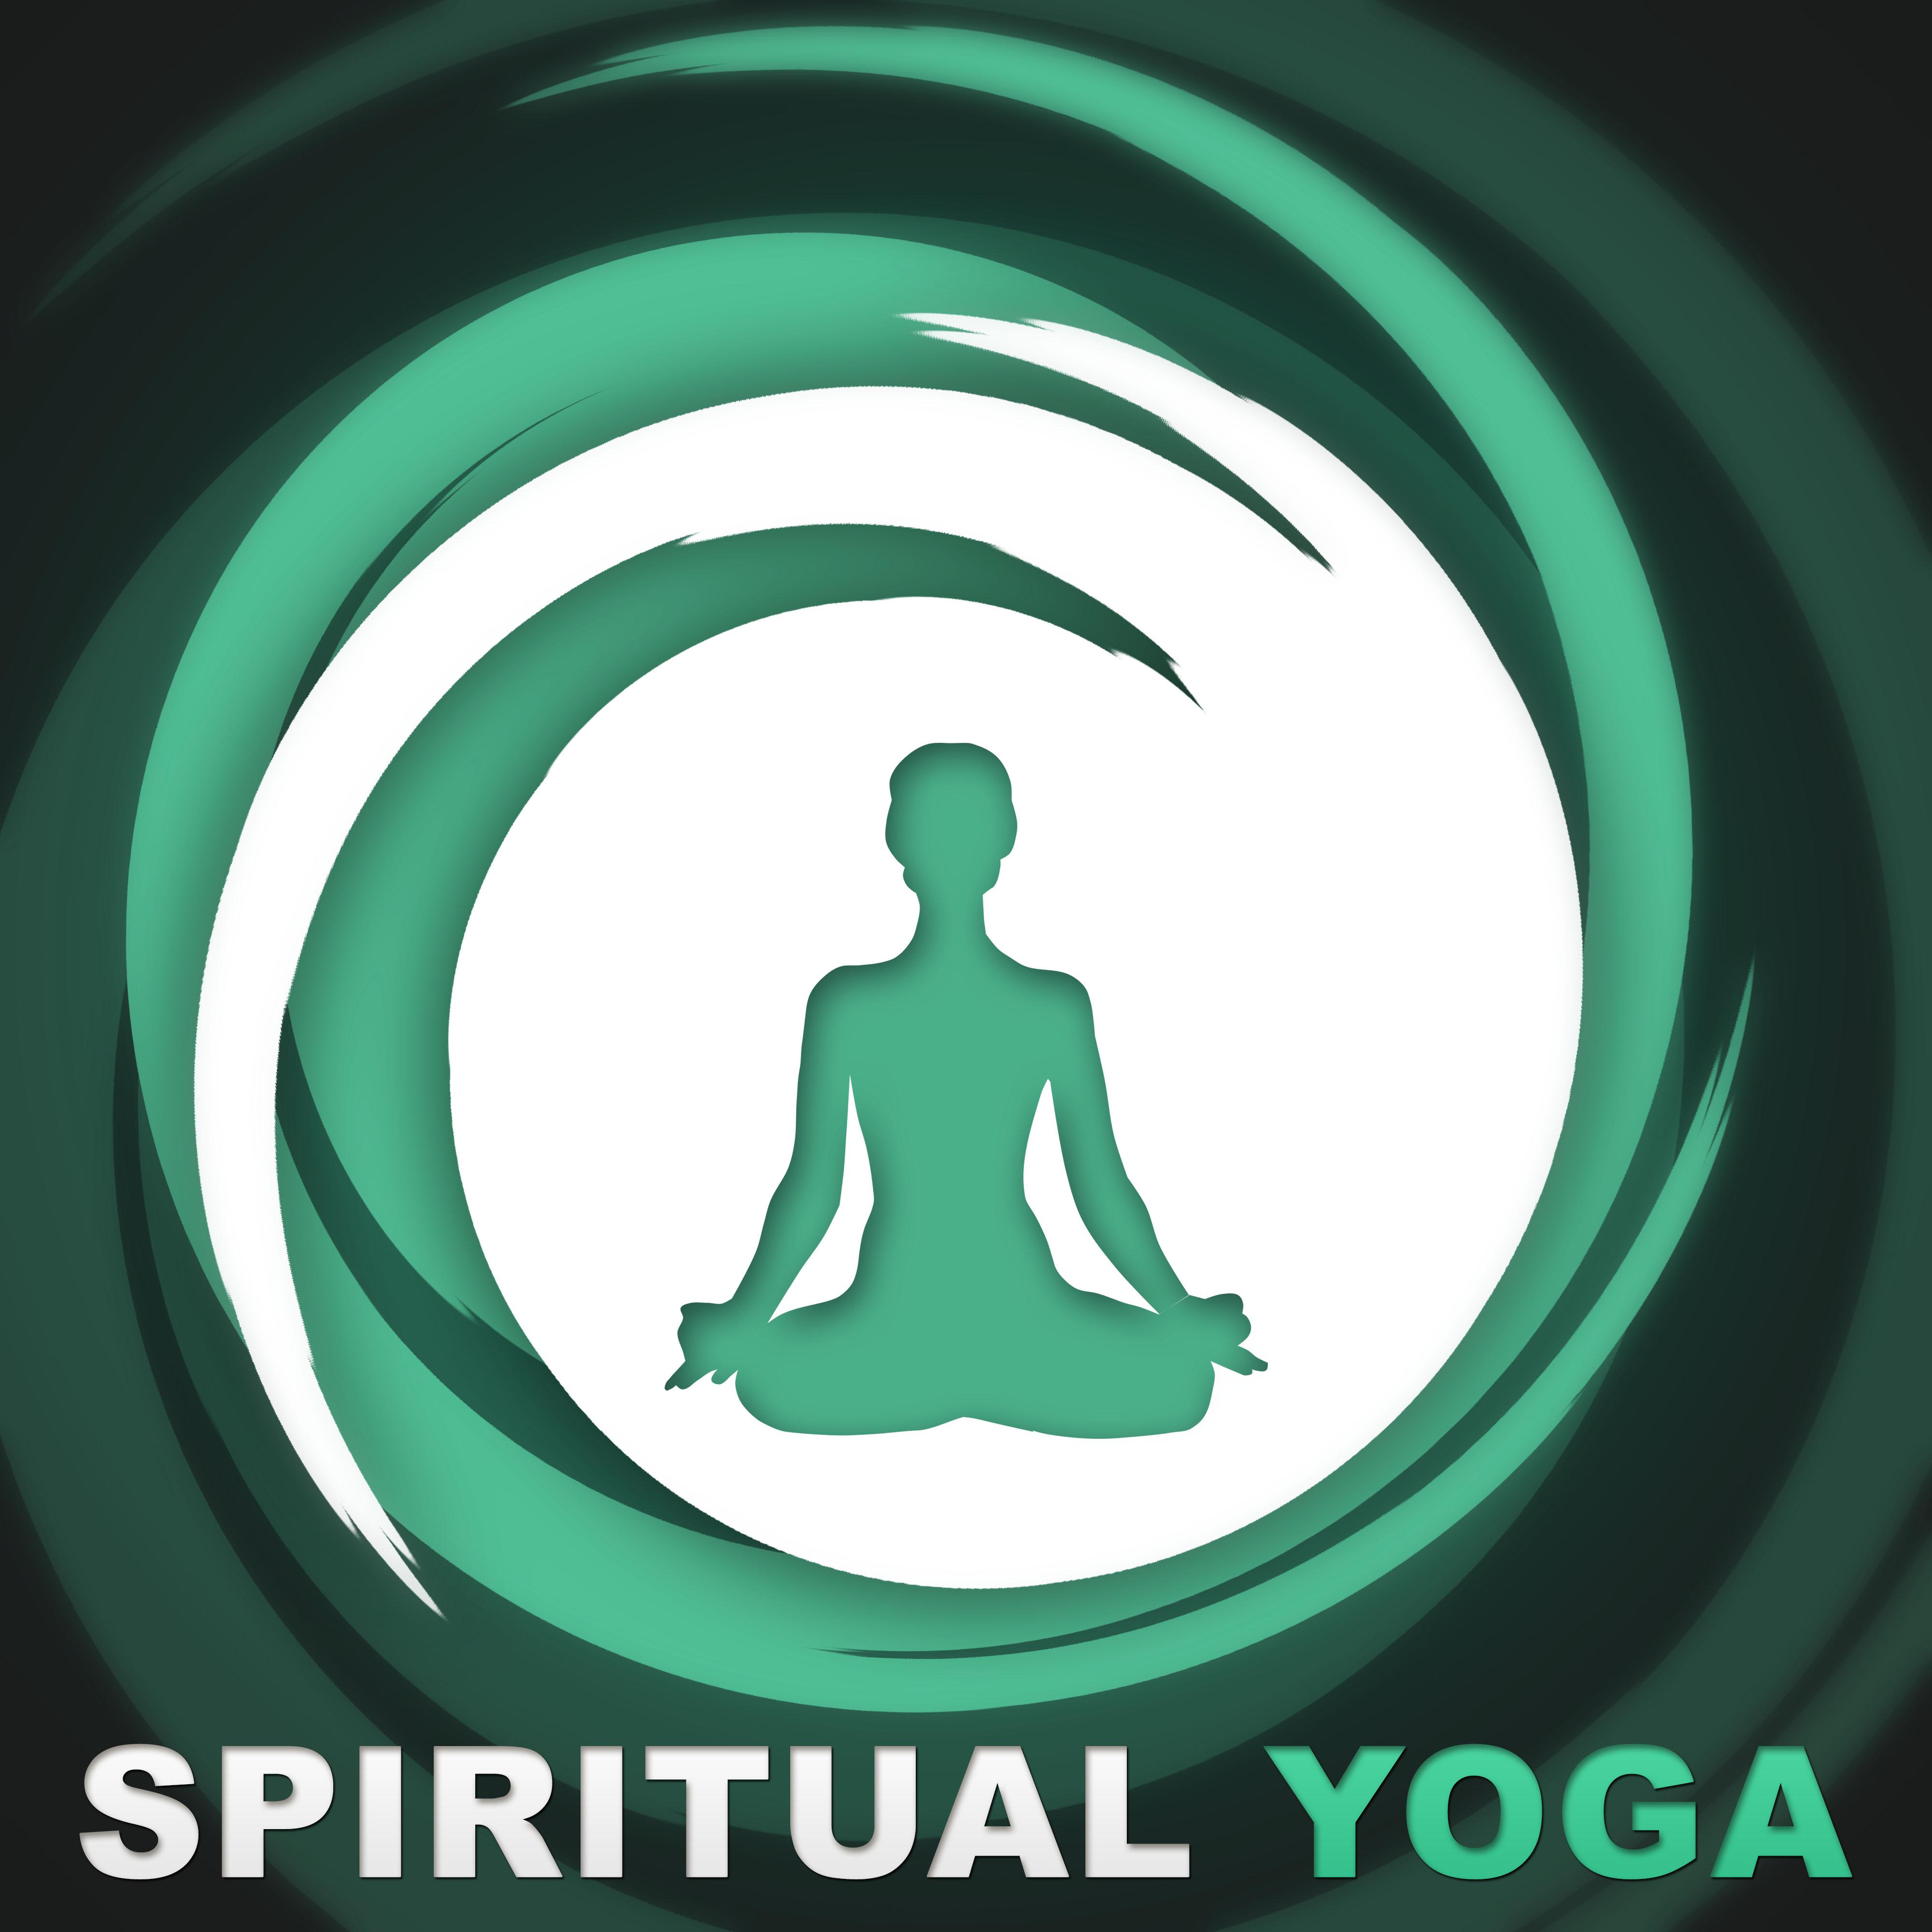 Spirytual Yoga  Healing Nature Sounds for Yoga, Mindfulness Meditations, Total Relaxation, Calm Down, Sound Therapy